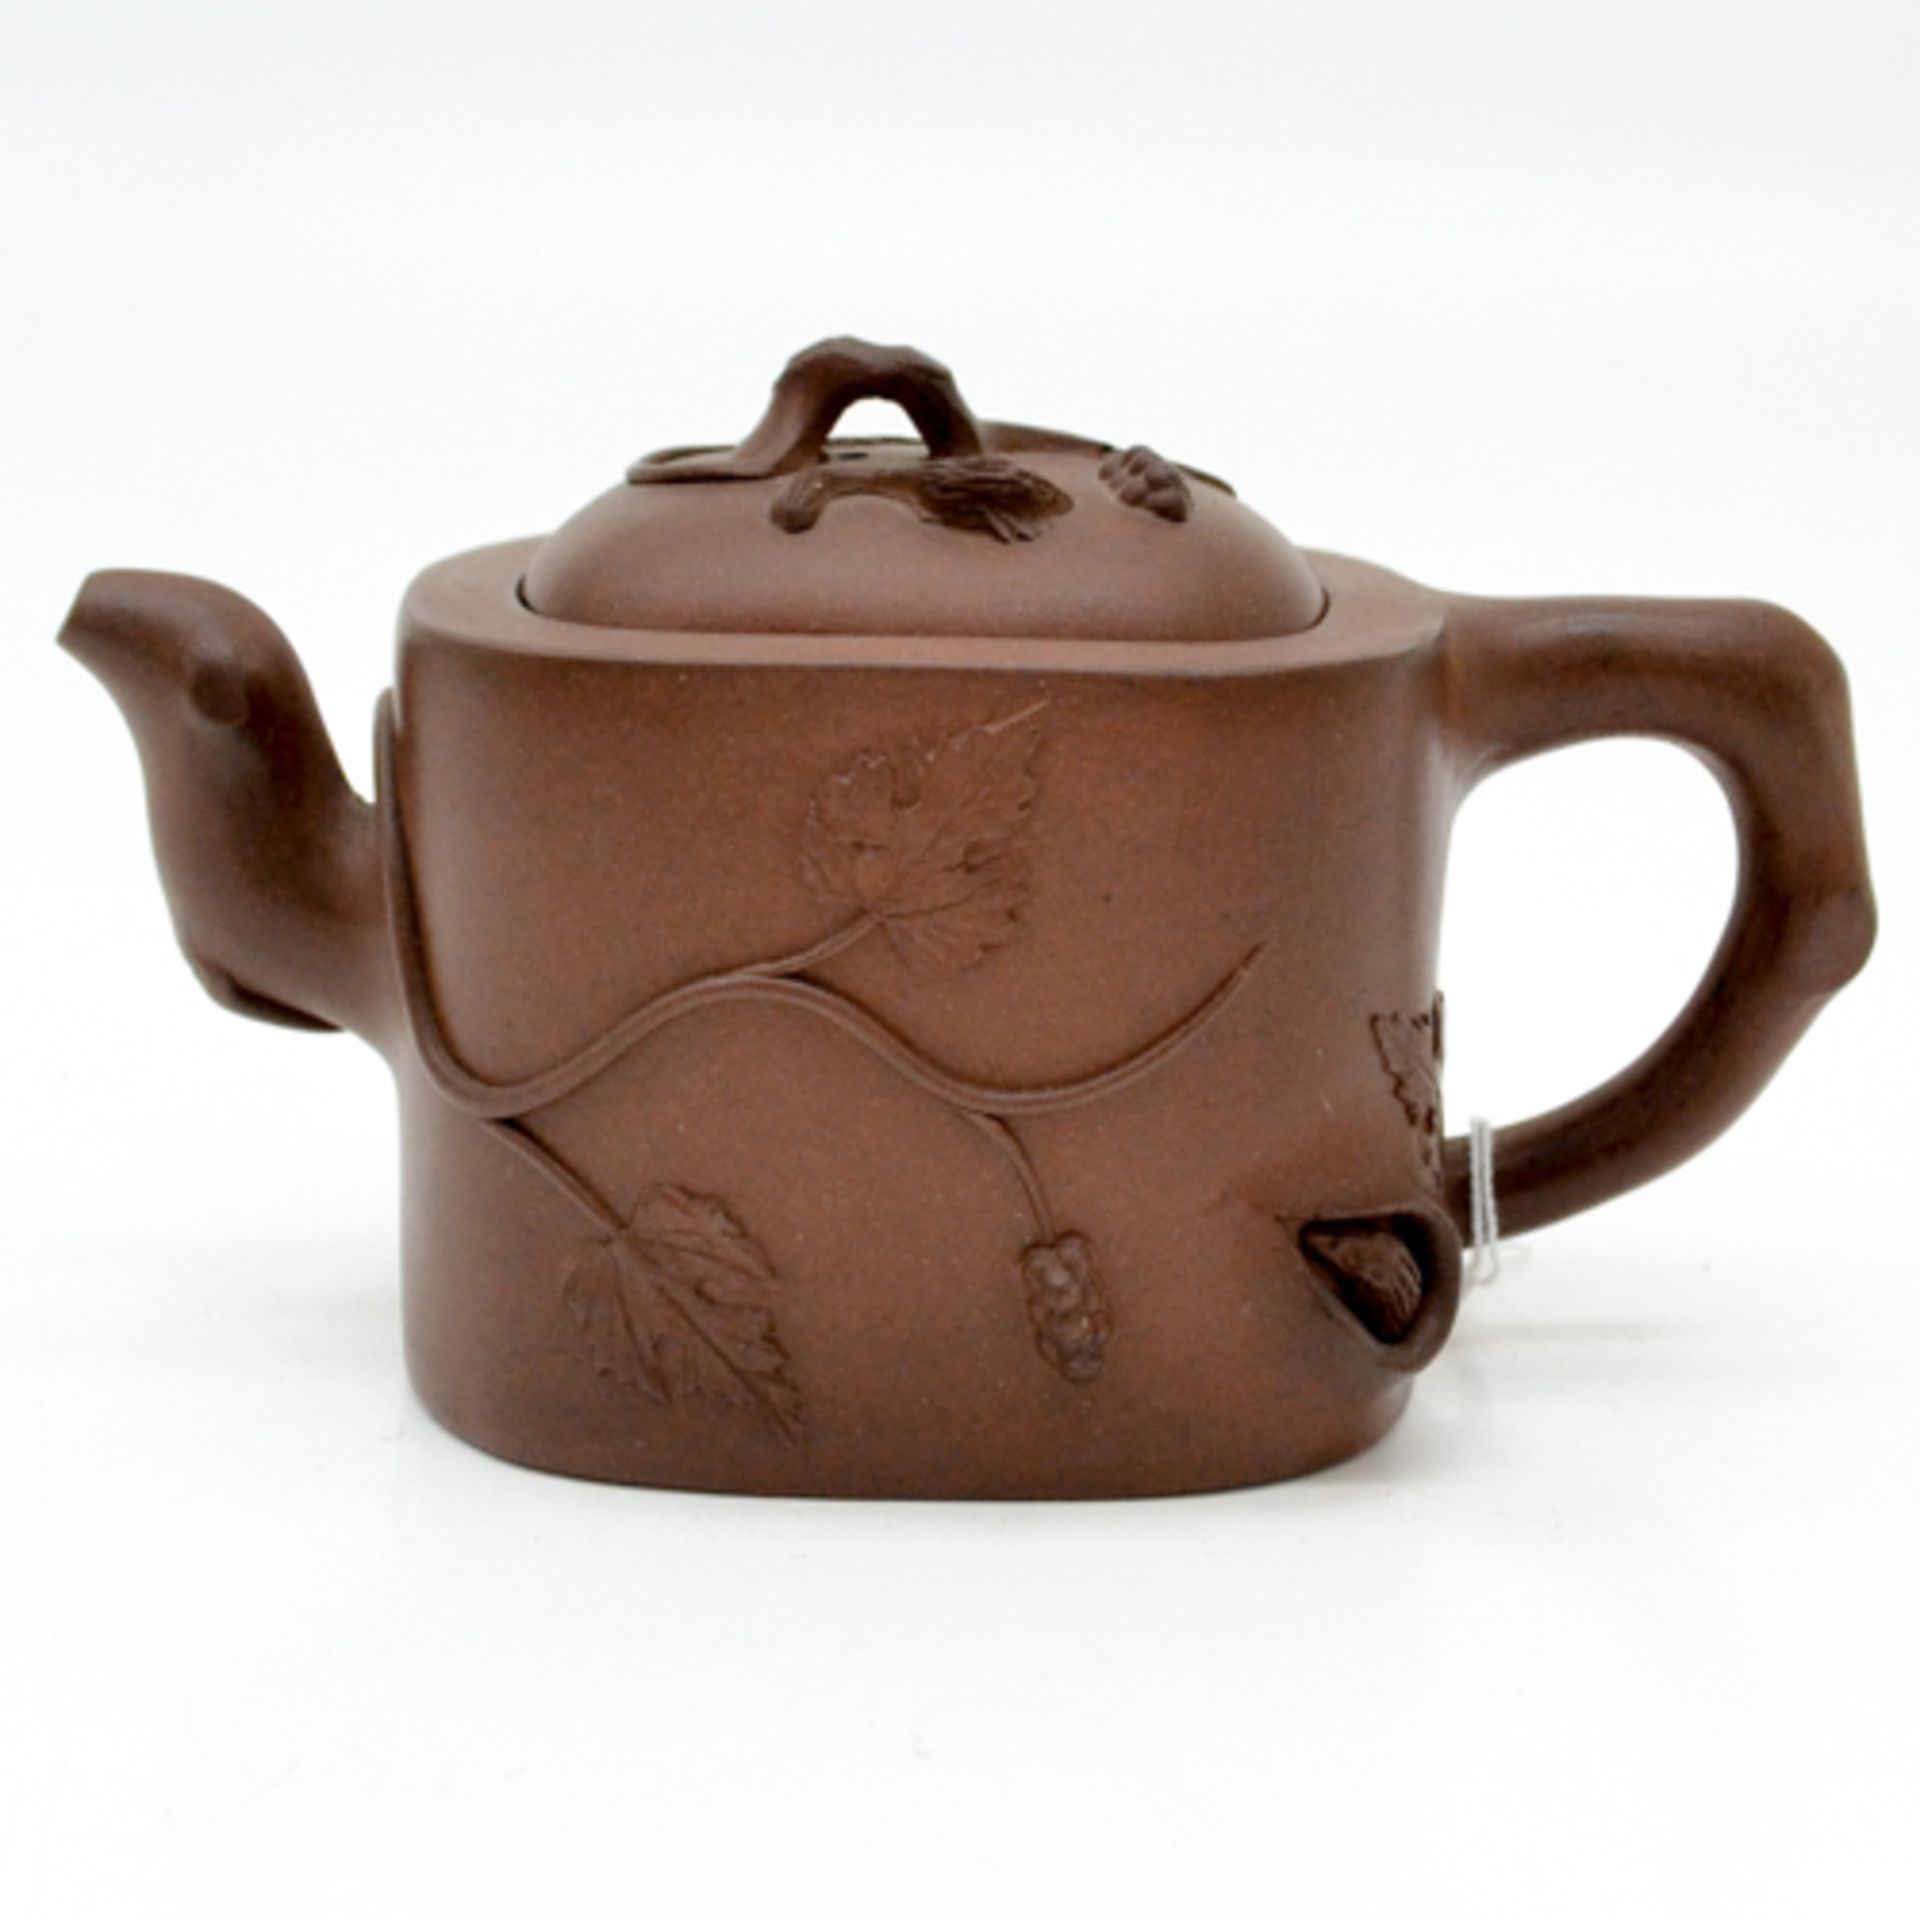 YIXING TEAPOT Decor of grapes and squirrels, Marked in lid and bottom, 11 cm tall.